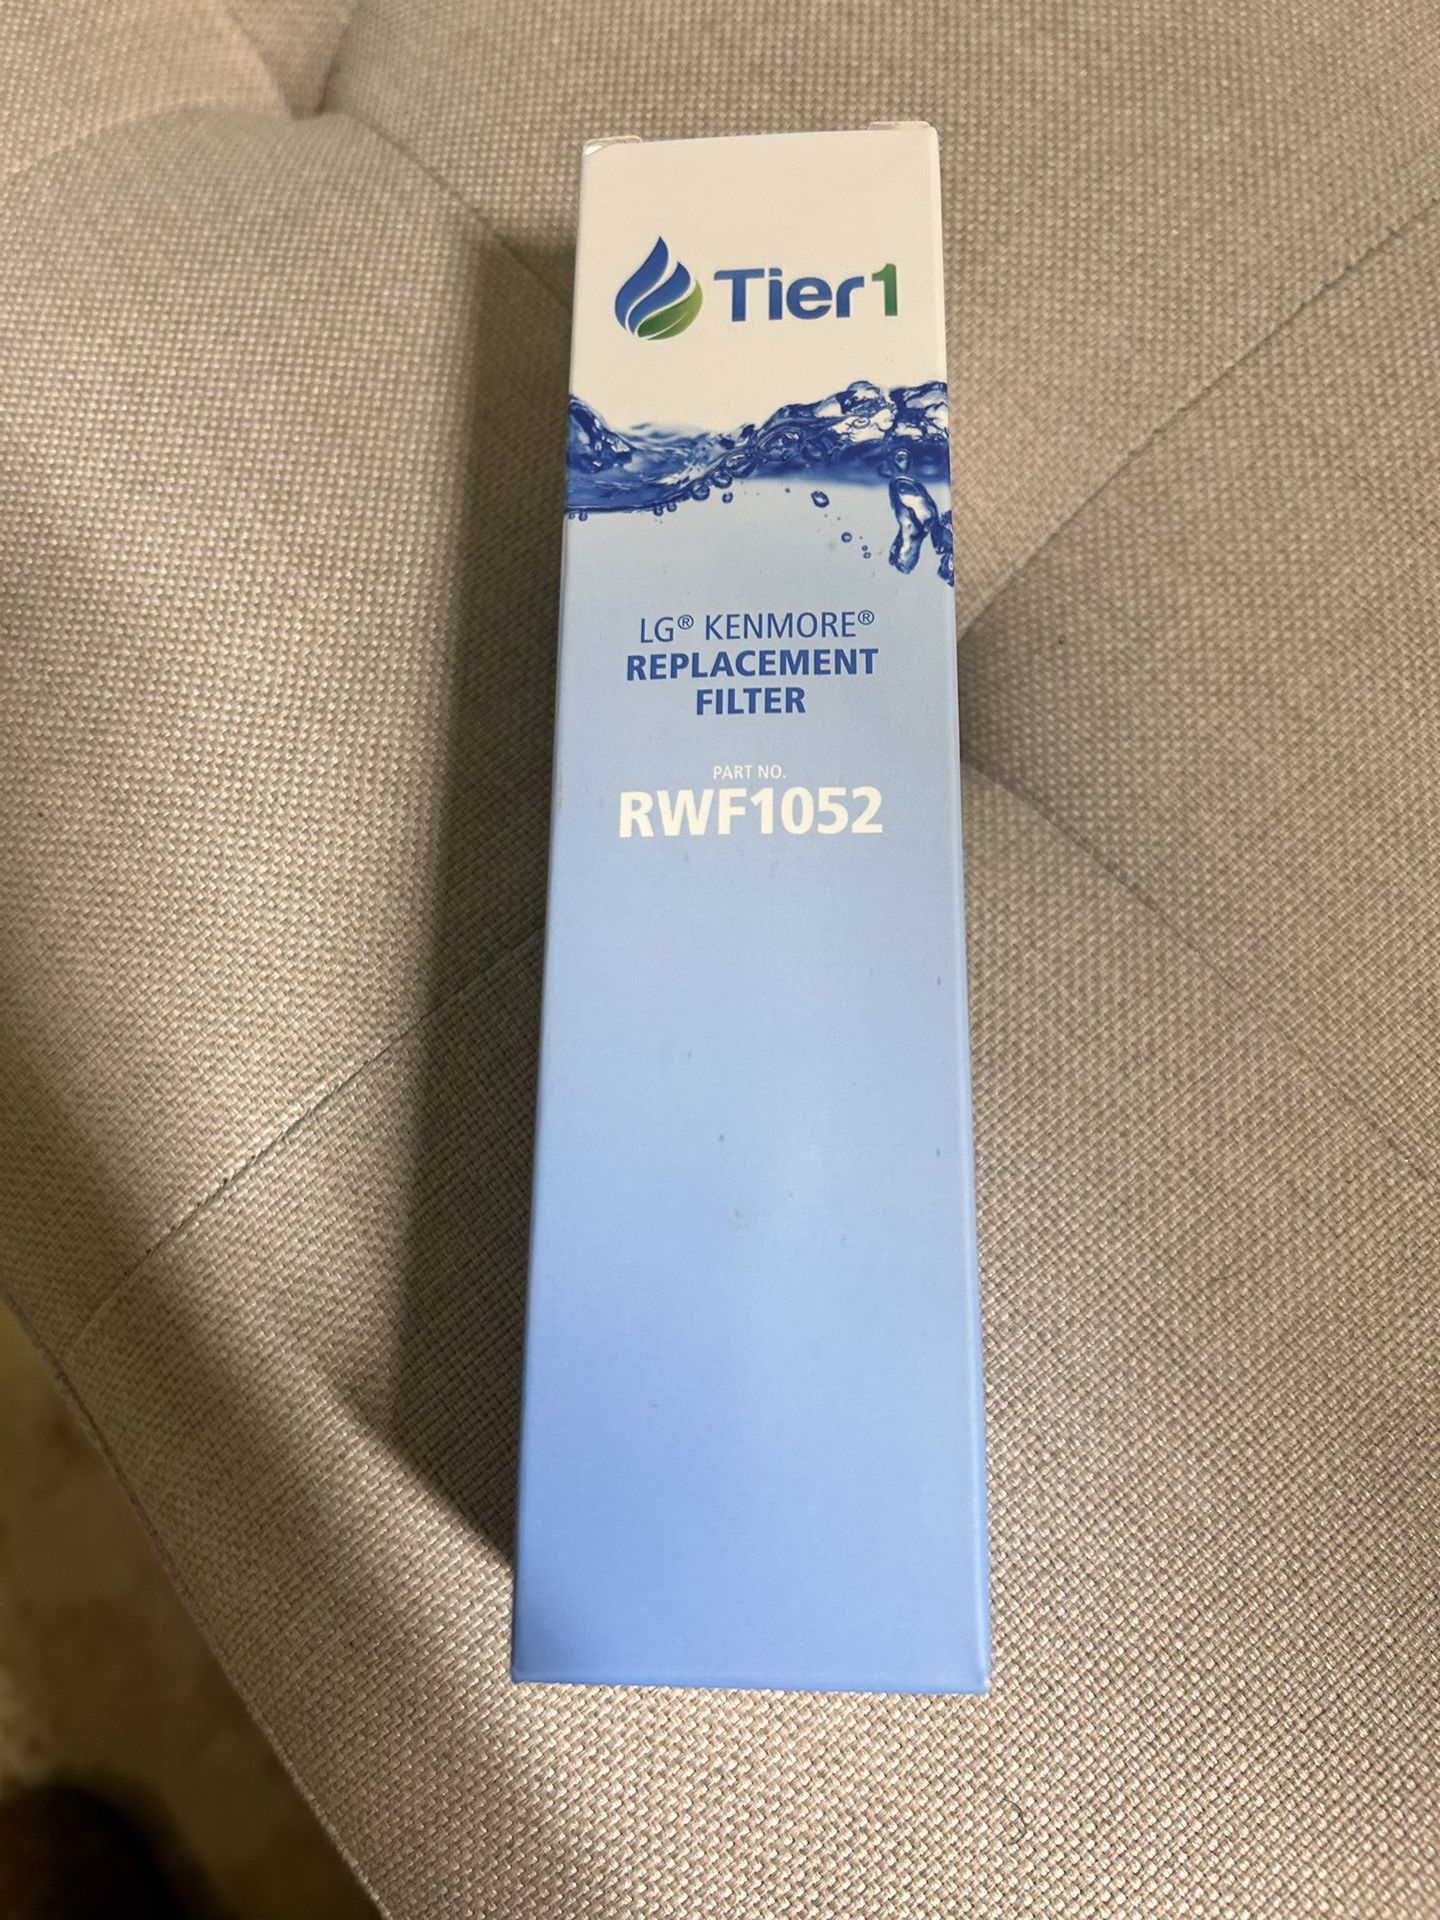 Tier1 LG kenmore Replacement filter